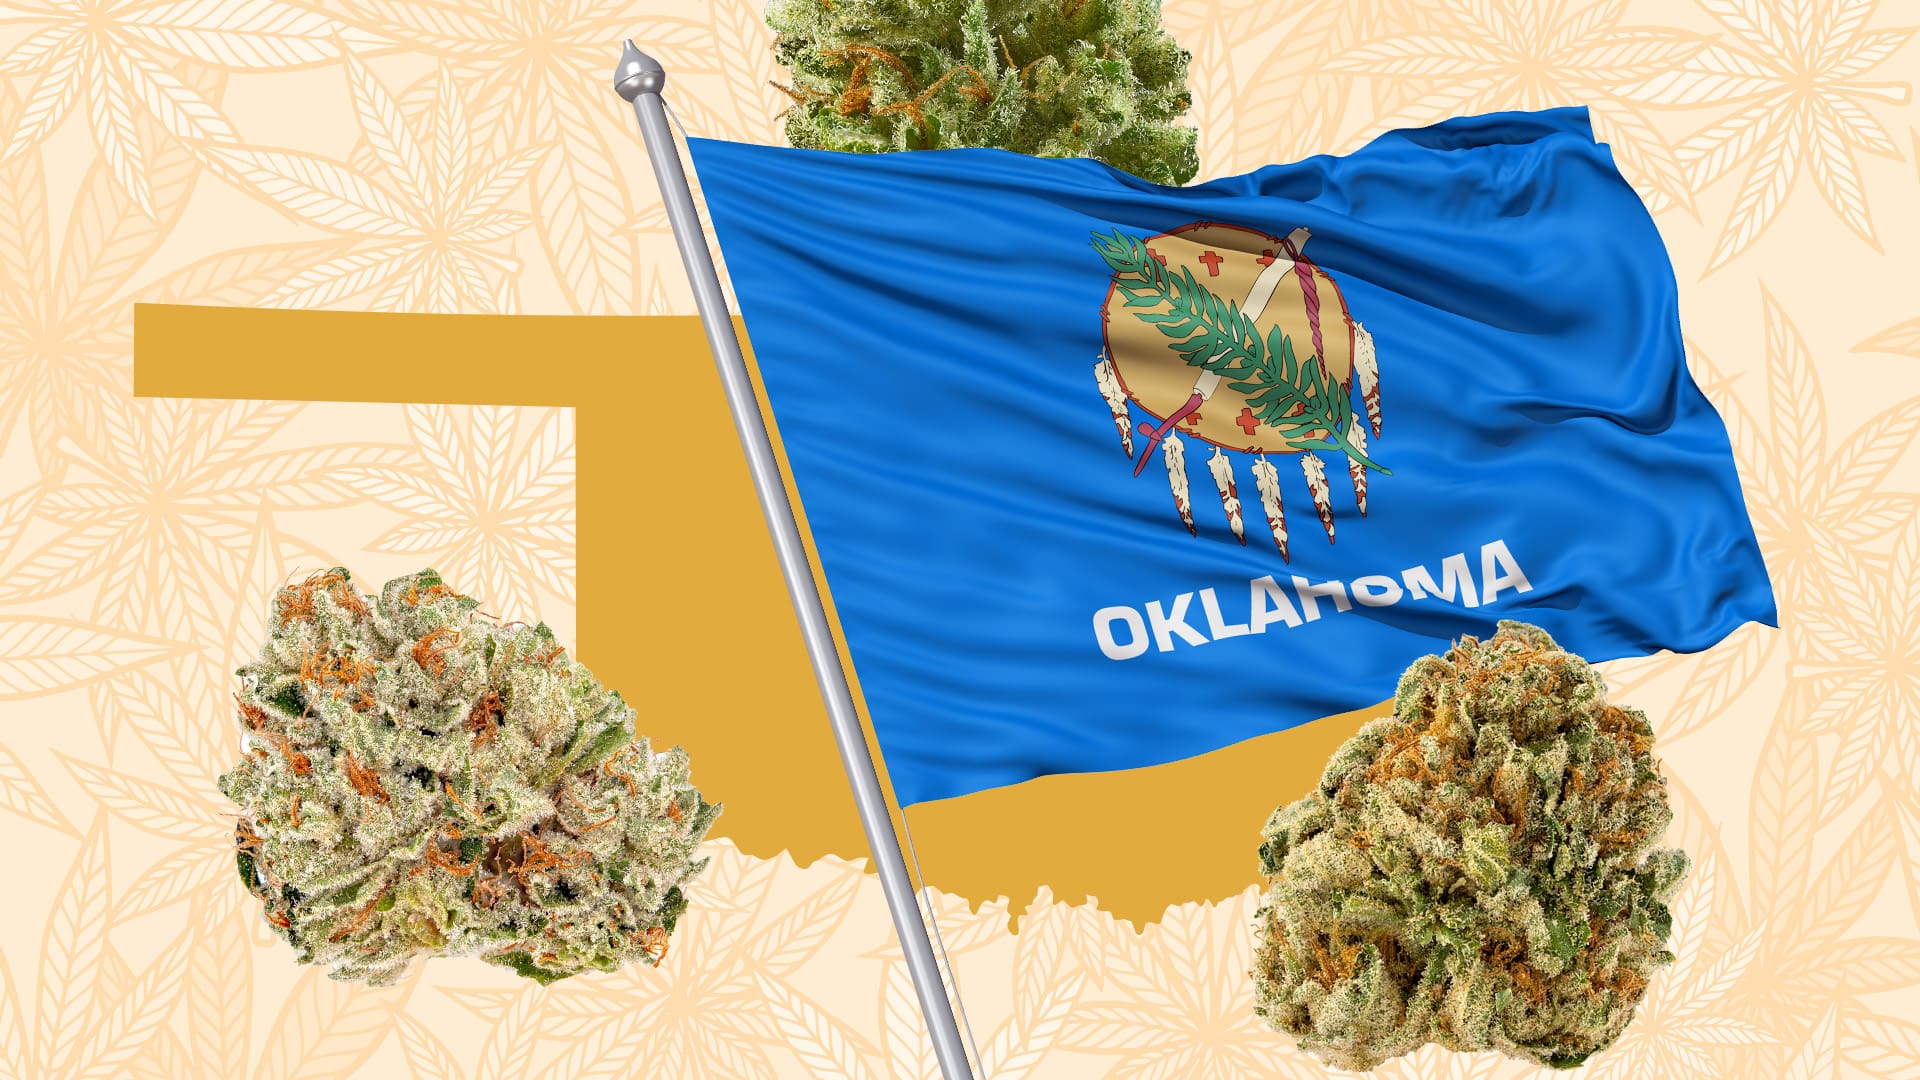 Oklahoma legalization measure suffers crushing defeat High Desert Relief